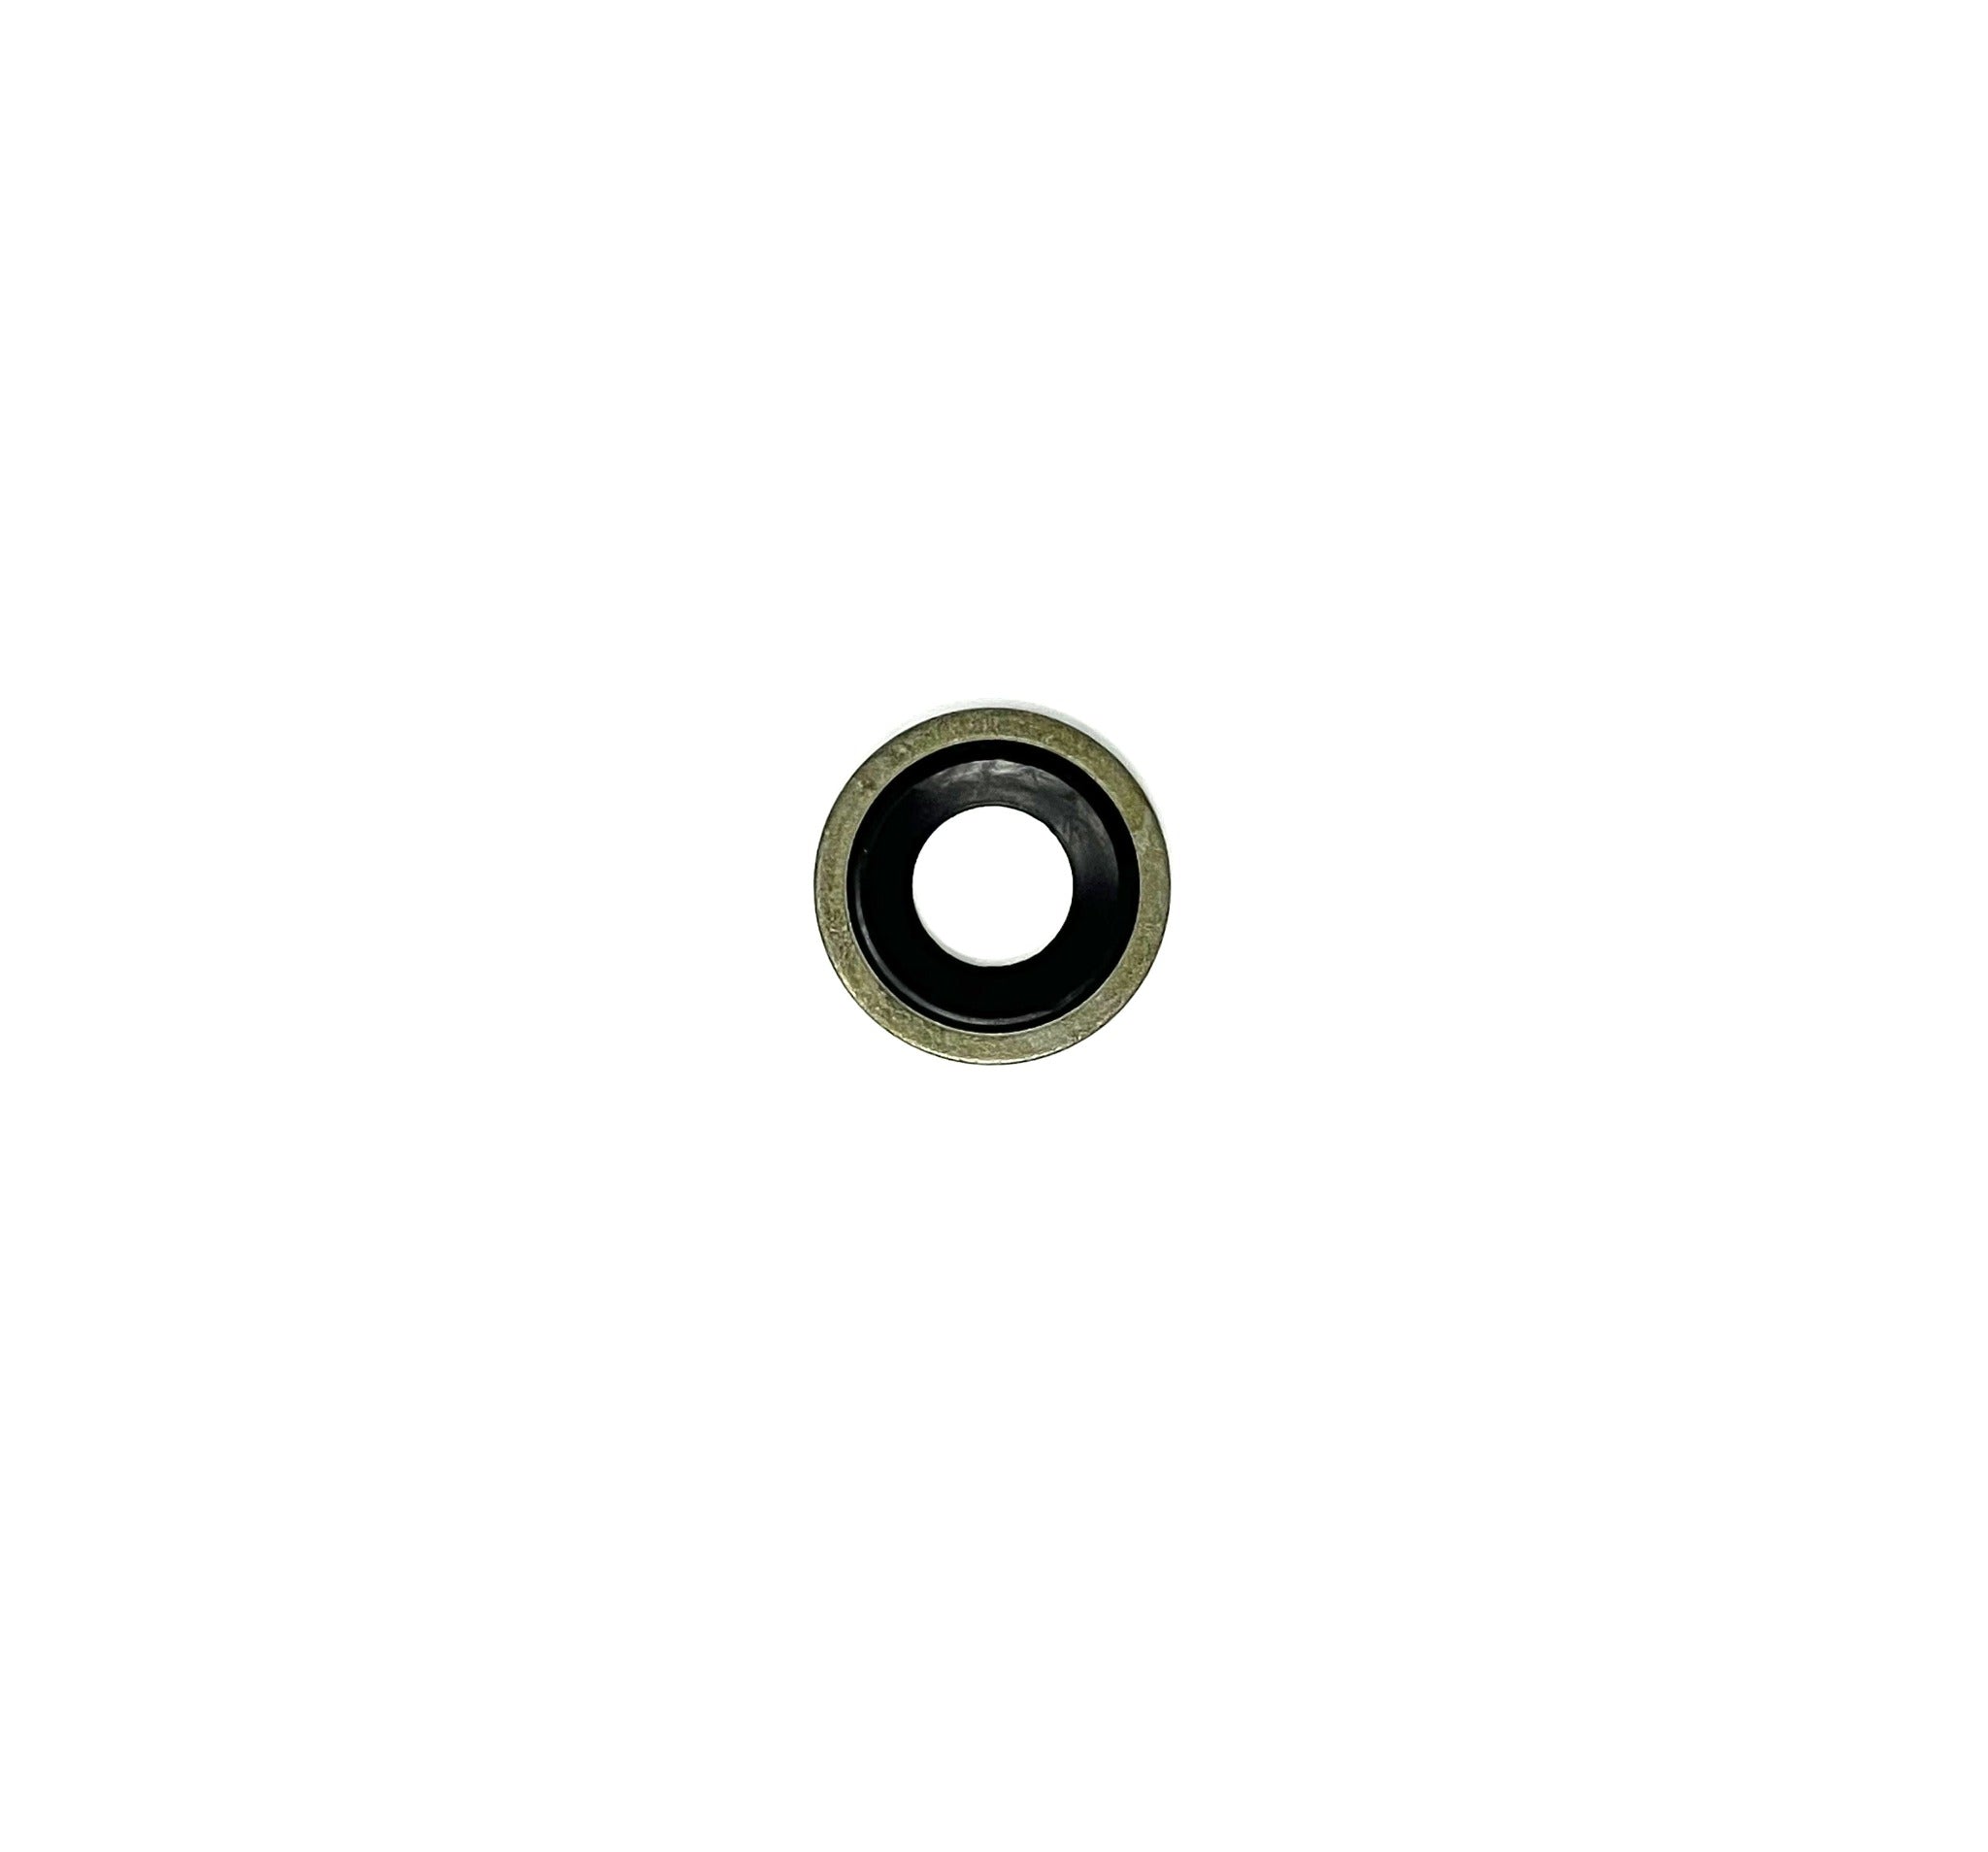 Steel Oil Drain Plug Gaskets   1/2" ID 1" OD 3/64" Thick (Pack of 5)